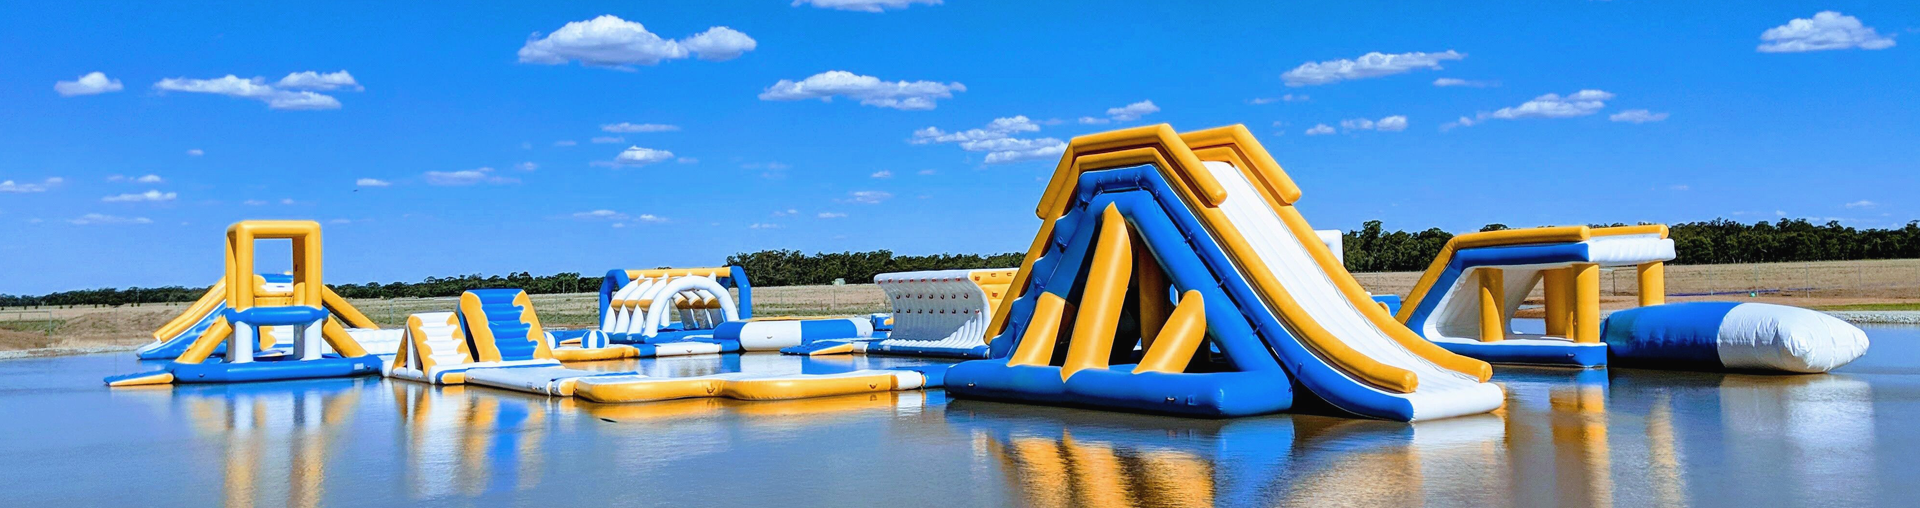 product-New Design Inflatable Fun City Playground Inflatable Castle Park With Water For Sale-Bounci-1